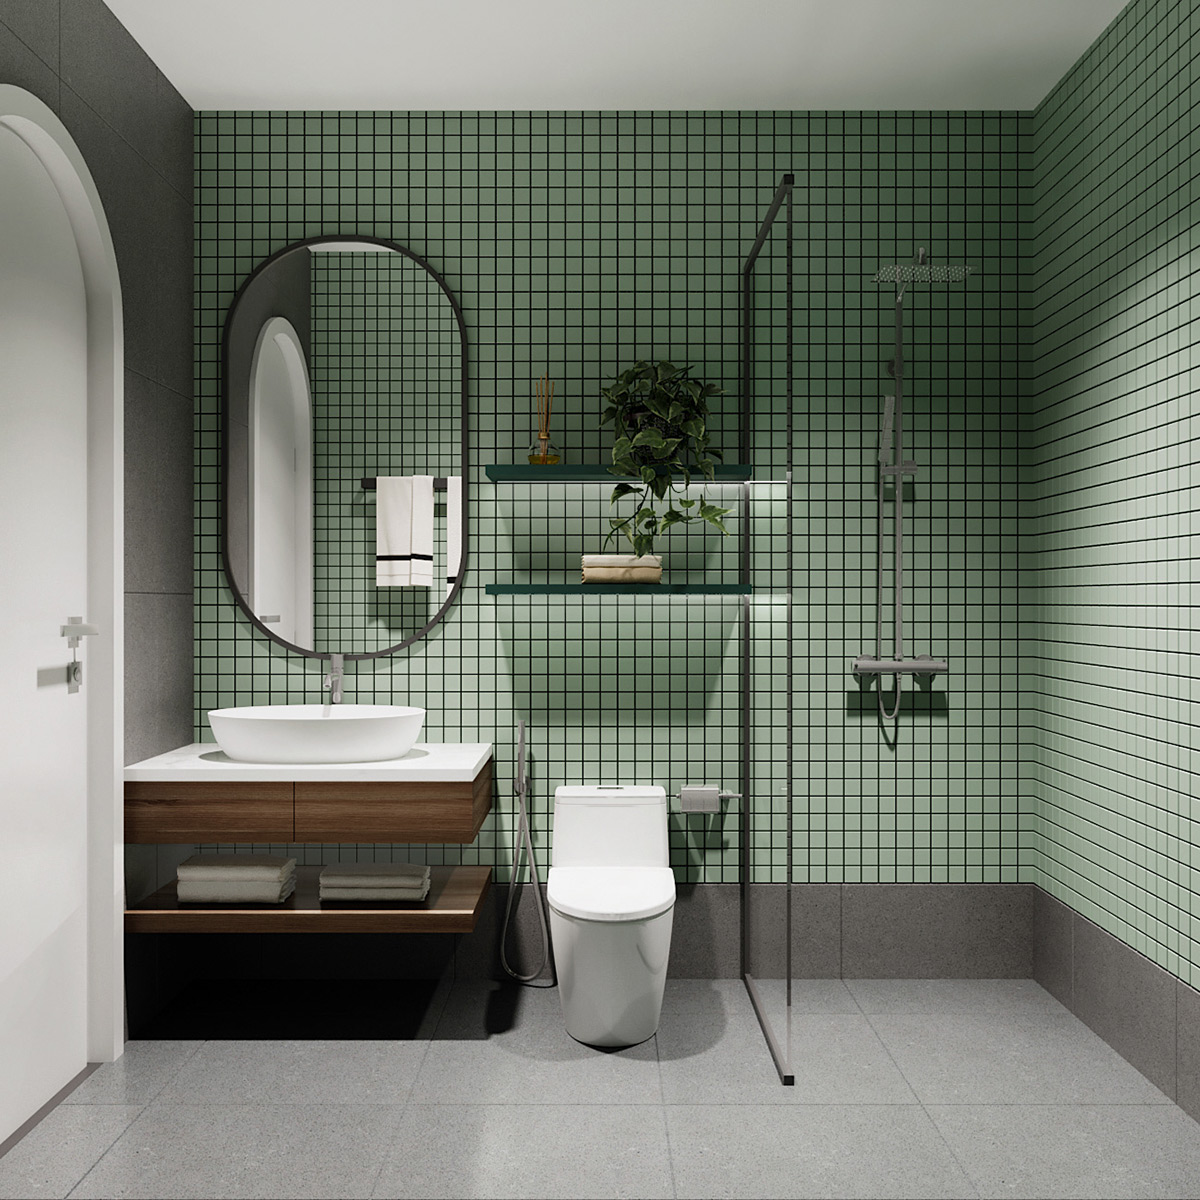 Use green tiles to create an expanse of color around the wet zone while the rest of the room fades into the background in shades of gray.